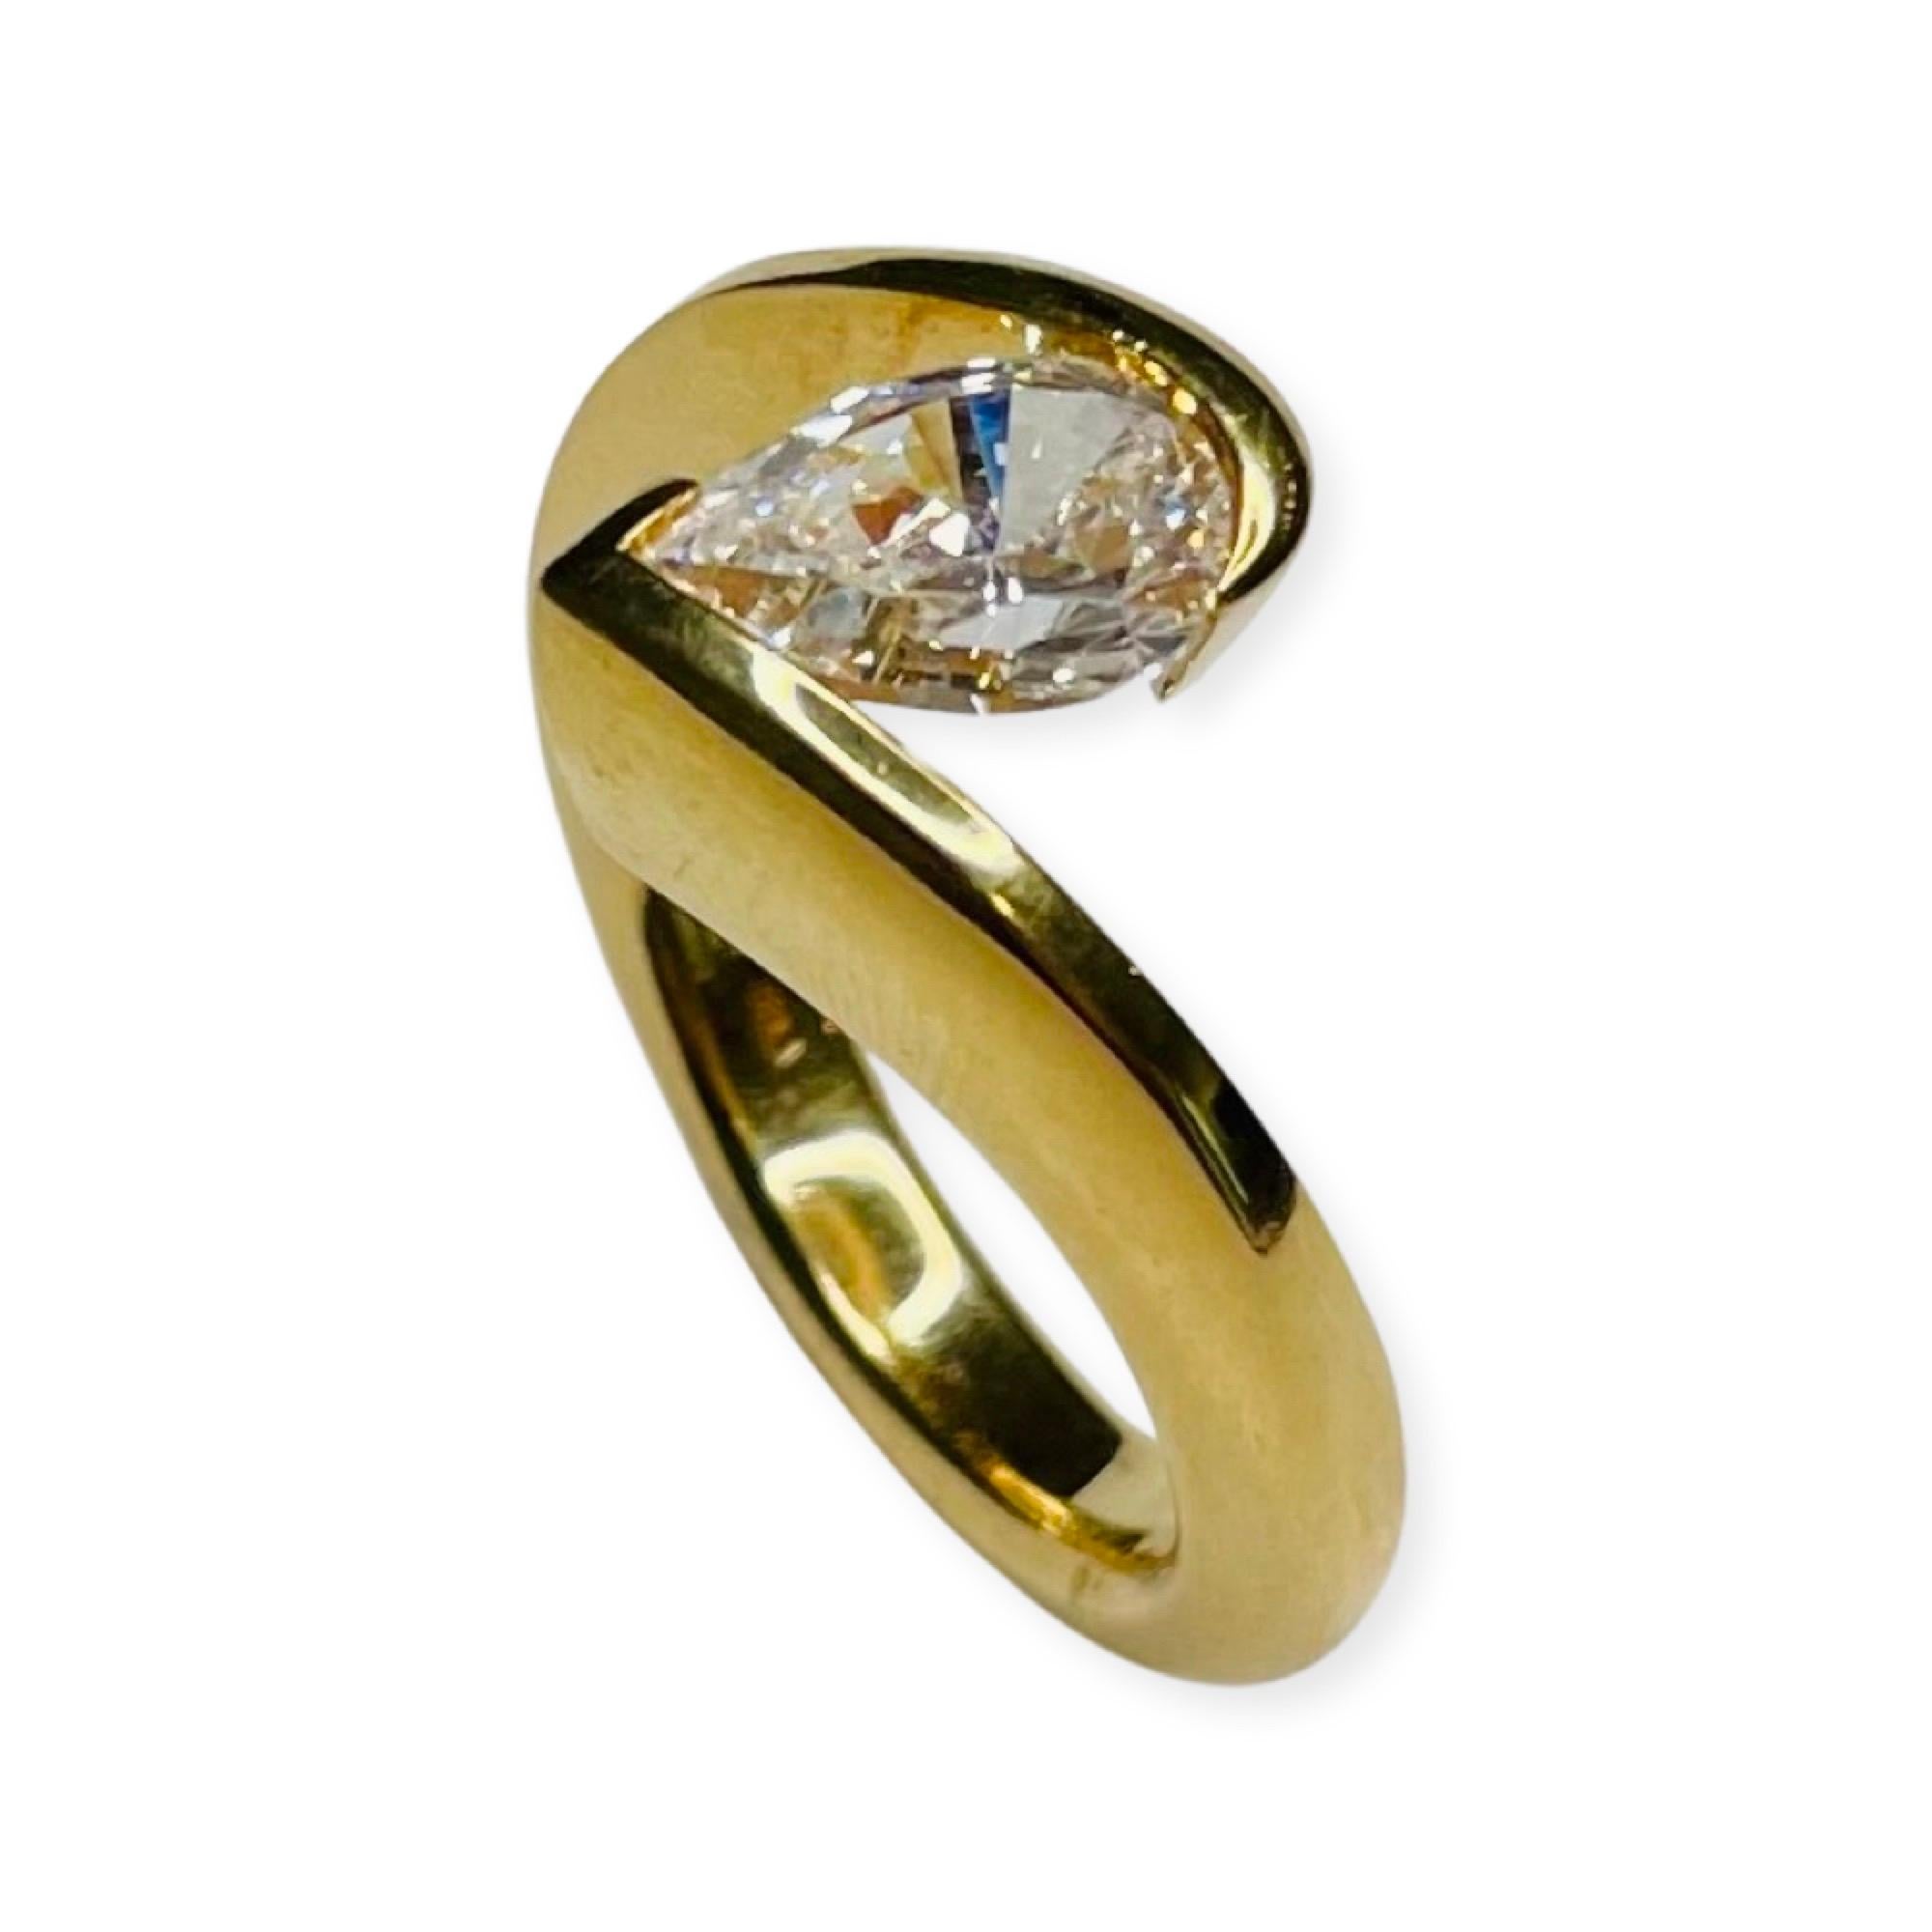 Steven Kretchmer 18K Yellow Pear Shaped CZ Tension Set Ring. The ring is designed to hold a 1.5 carat diamond.  It is Hallmarked Pt950 c 1990 USA.  It is trademarked with the triangle with comet tails off of the points for Kretchmer. It is ring